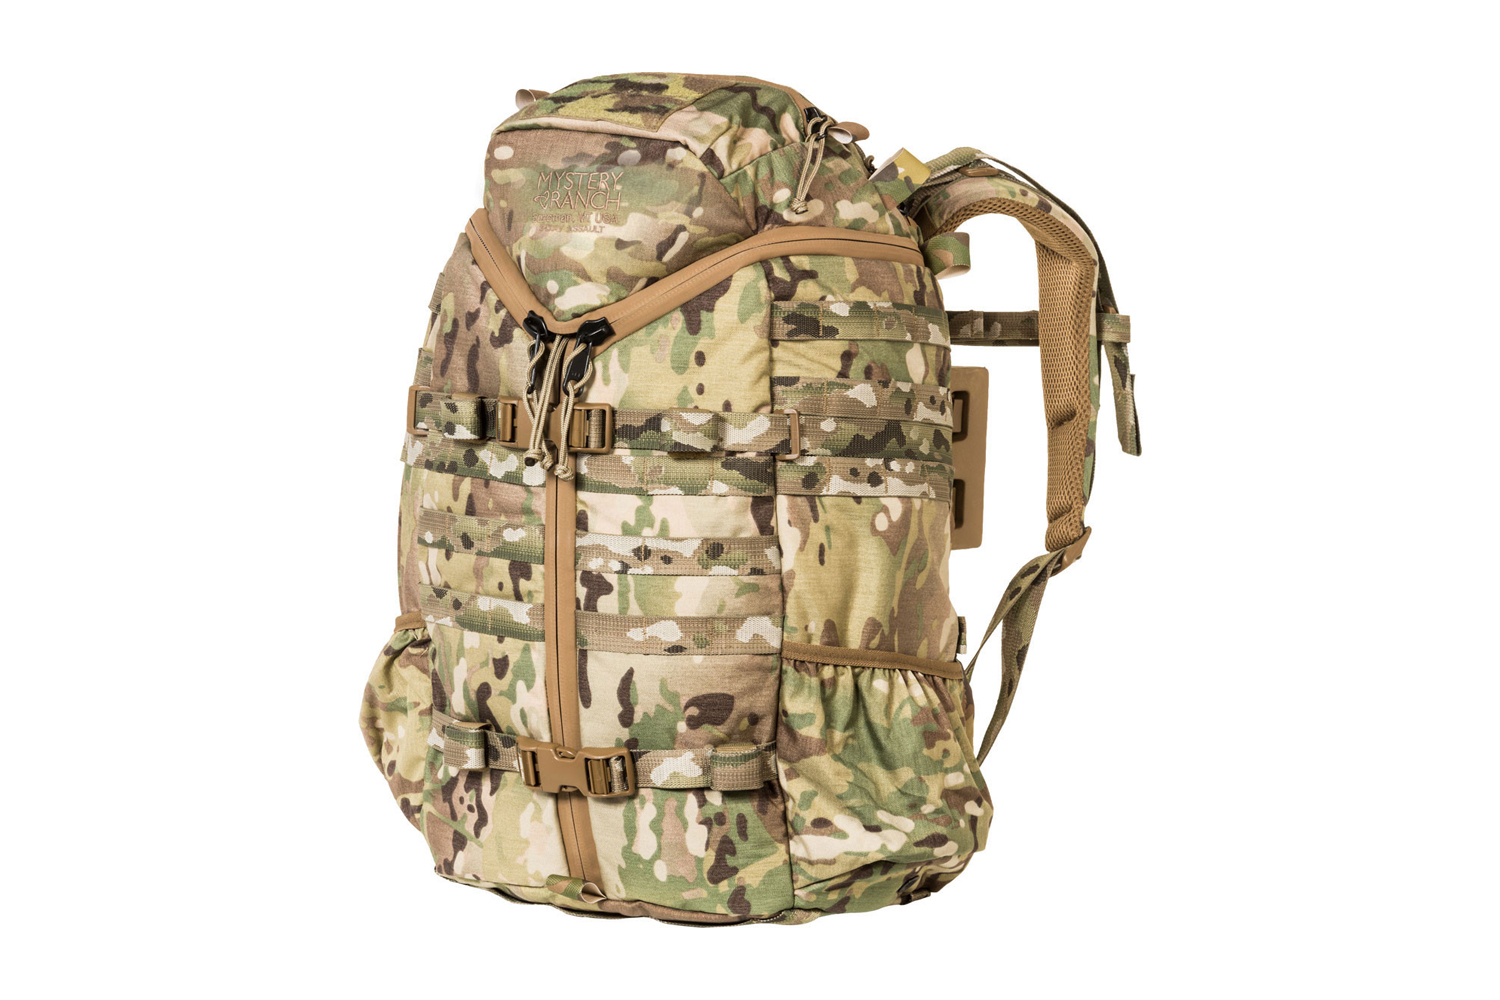  Samurai Tactical Tactical Day Pack Backpack for Everyday, Olive  Drab, One Size : Sports & Outdoors